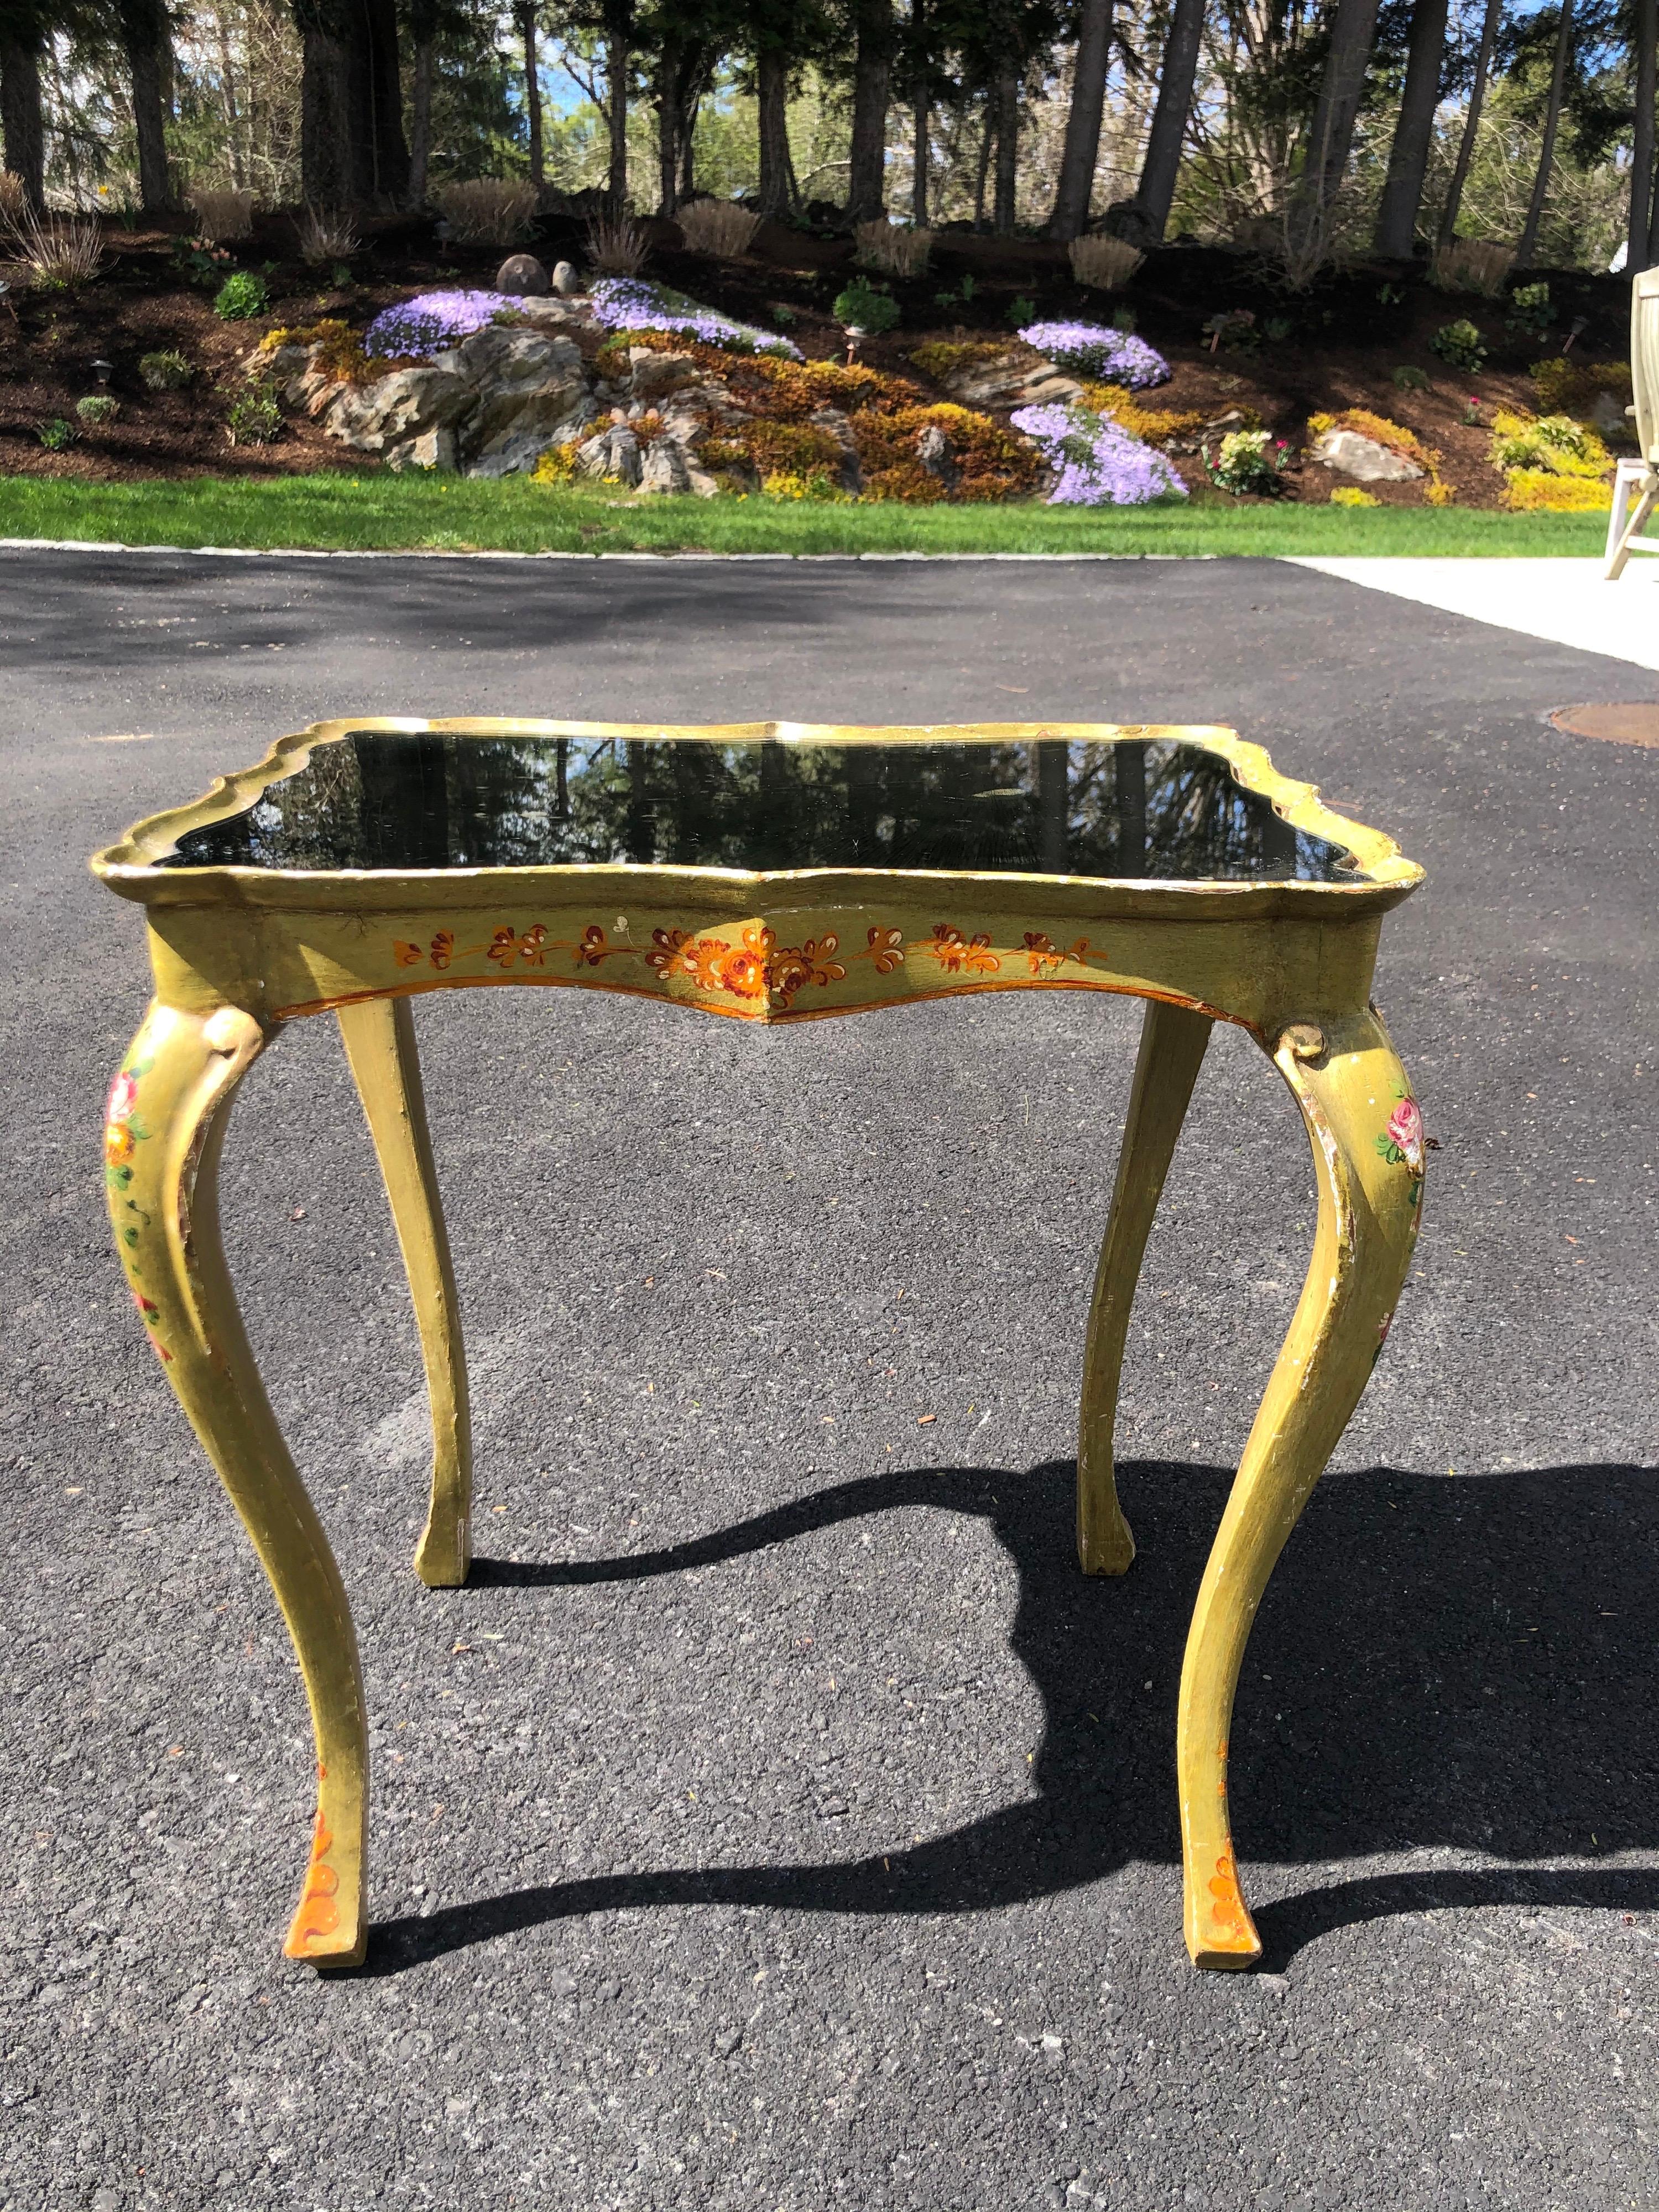 Italian hand painted mirror top side table. Scalloped edges and hand painted design make this table very special. Use in any room , even a bathroom. Custom cut scalloped mirroed top was in this piece when we received it. Not sure if it is original